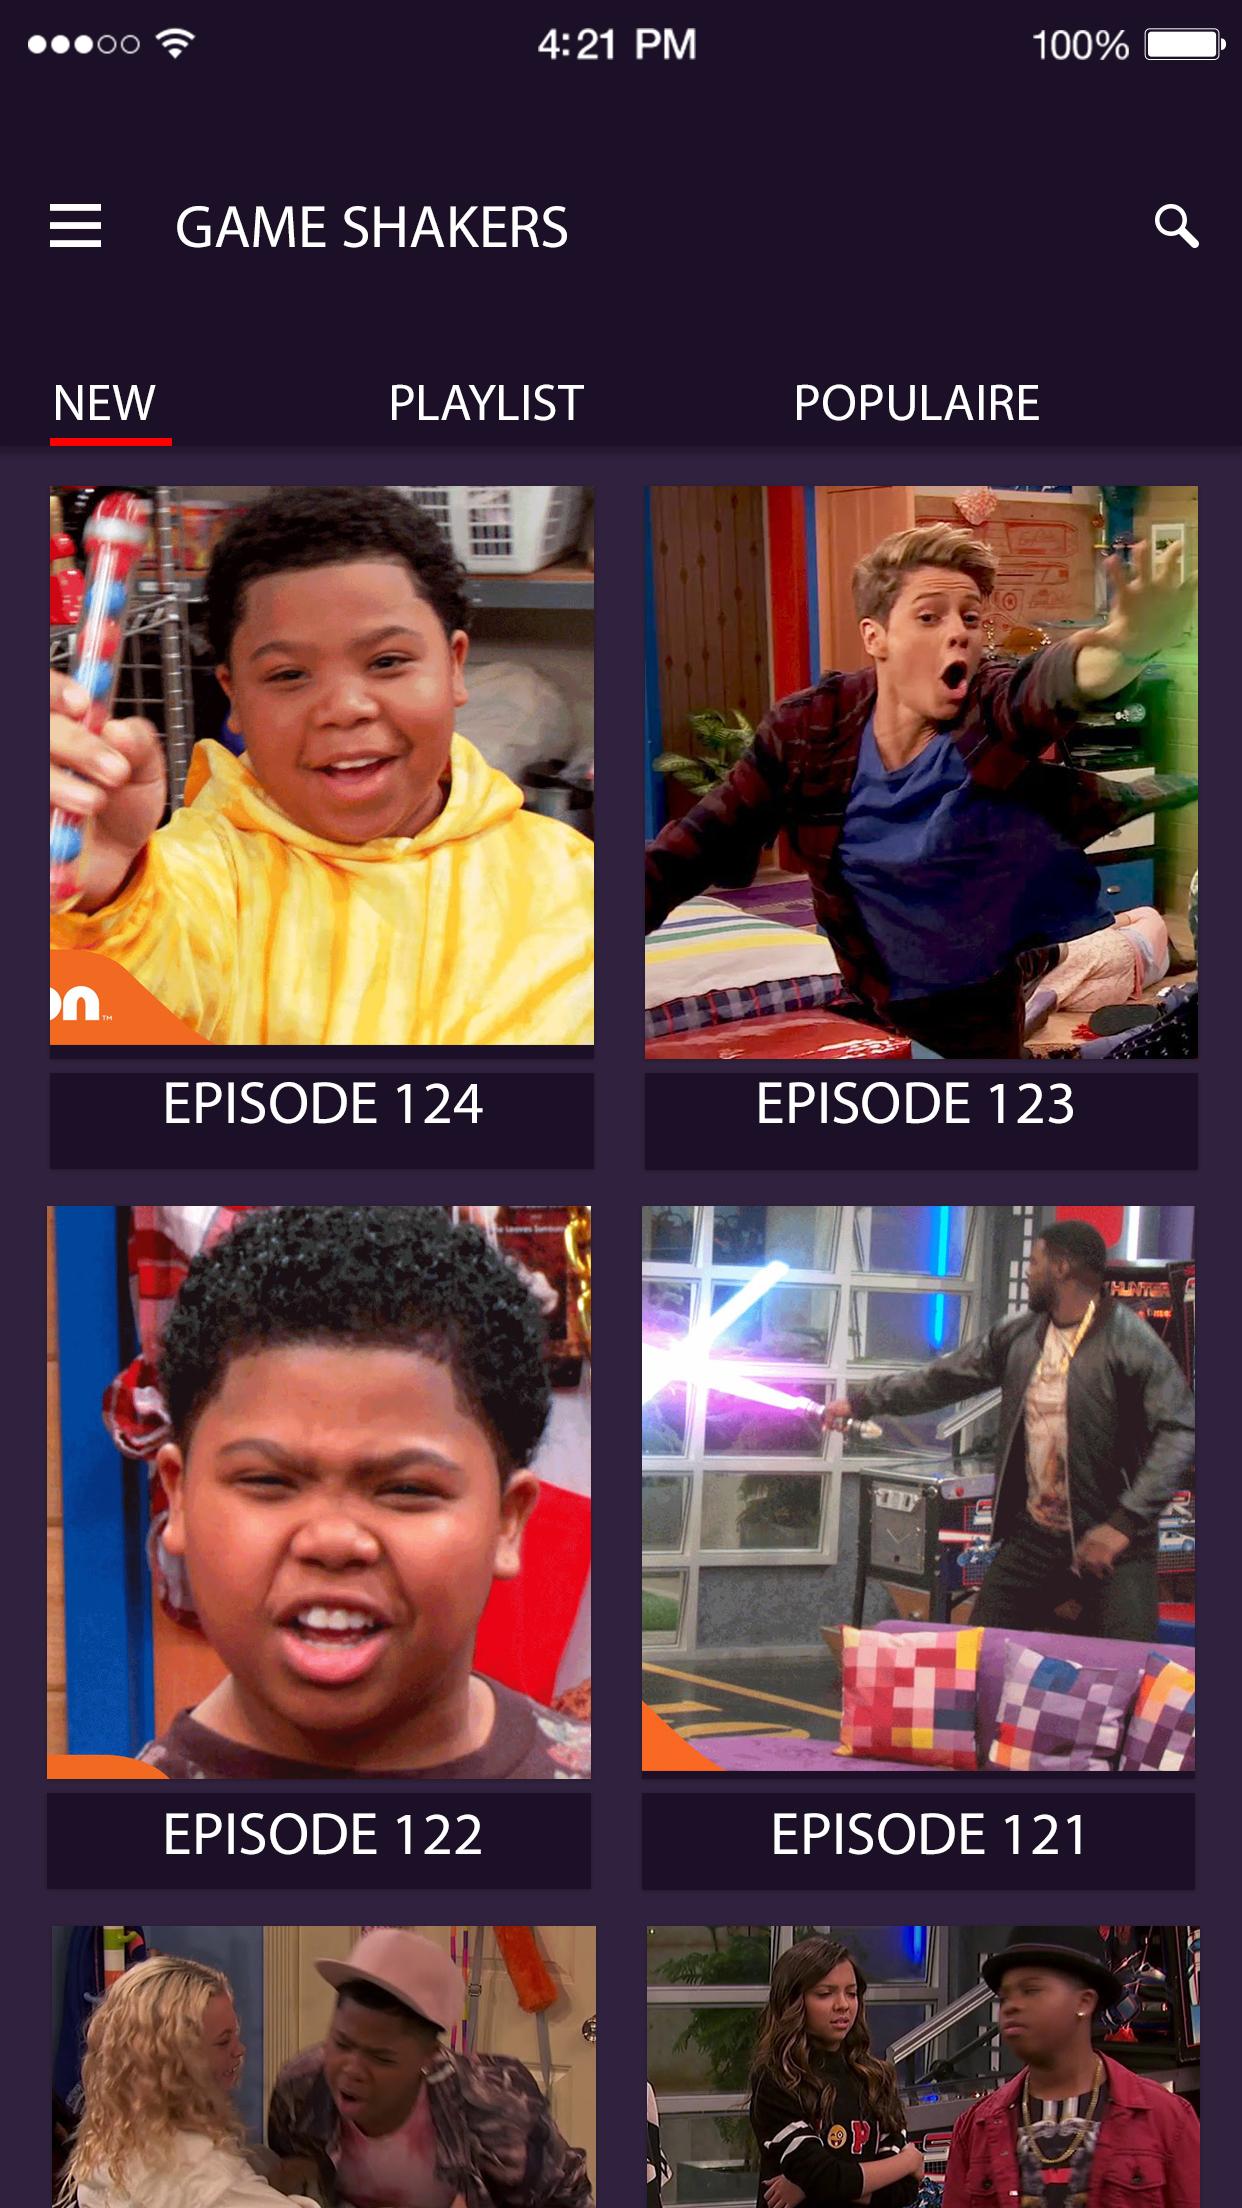 Game Shakers Videos APK 1.0 Download Android – Download Game Shakers Videos APK Latest Version APKFab.com